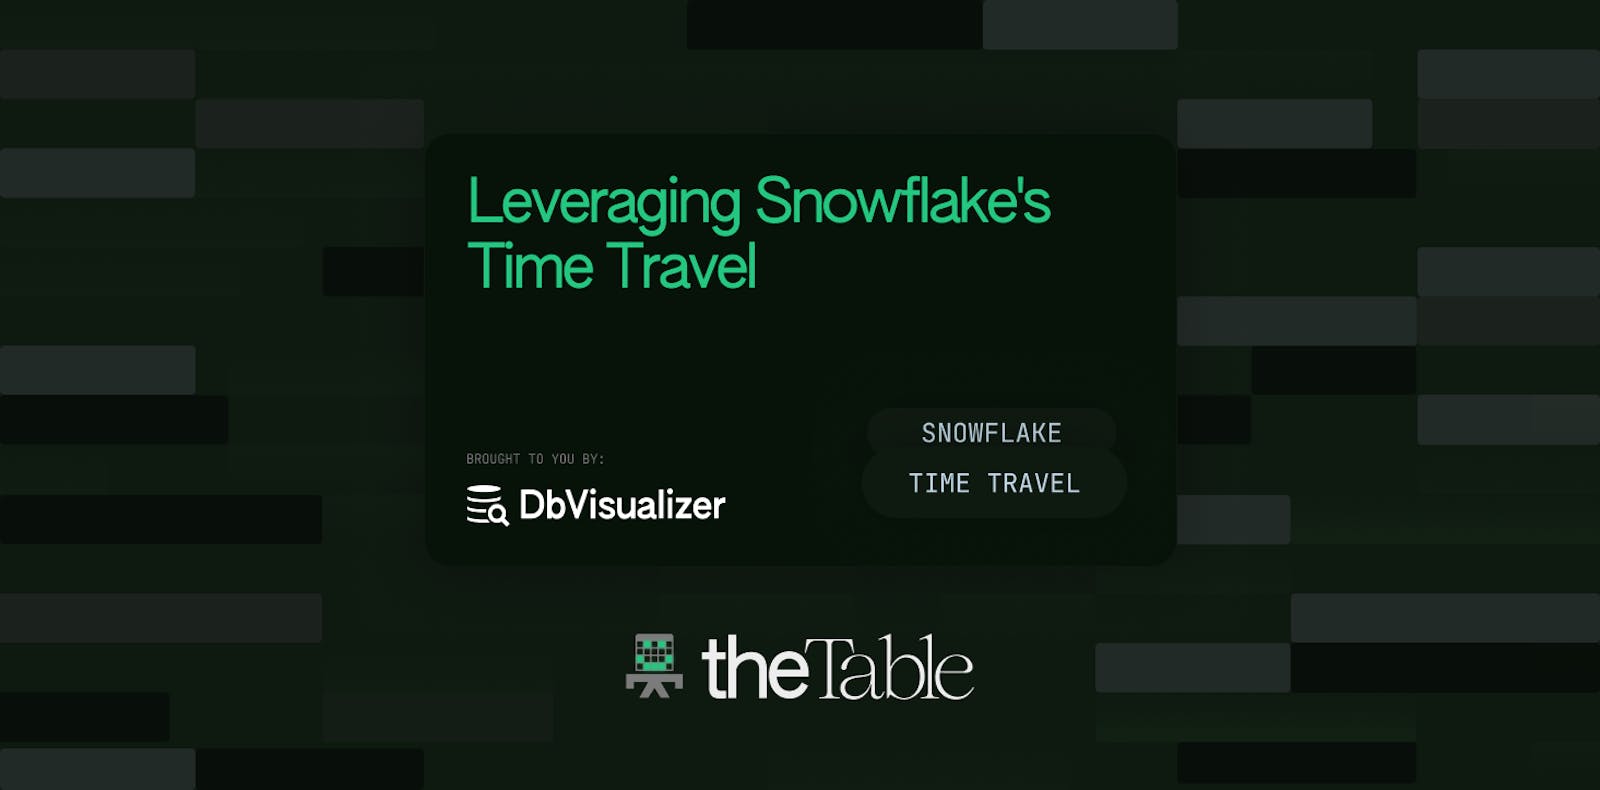 Leveraging Snowflake's Time Travel